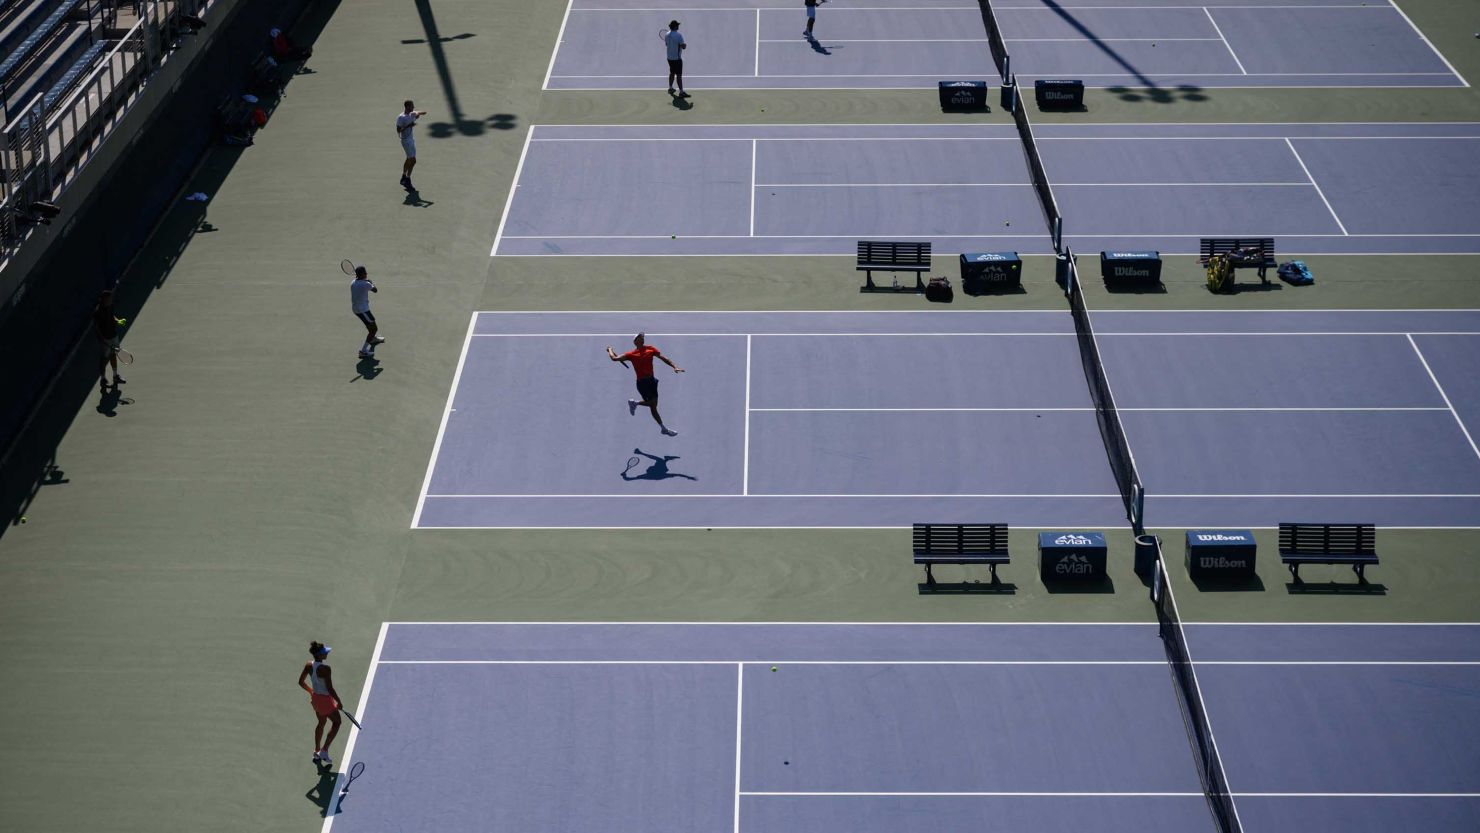 The 2021 US Open will offer mental health services to athletes (seen here during qualifying sessions ahead of the tournament's official start). 